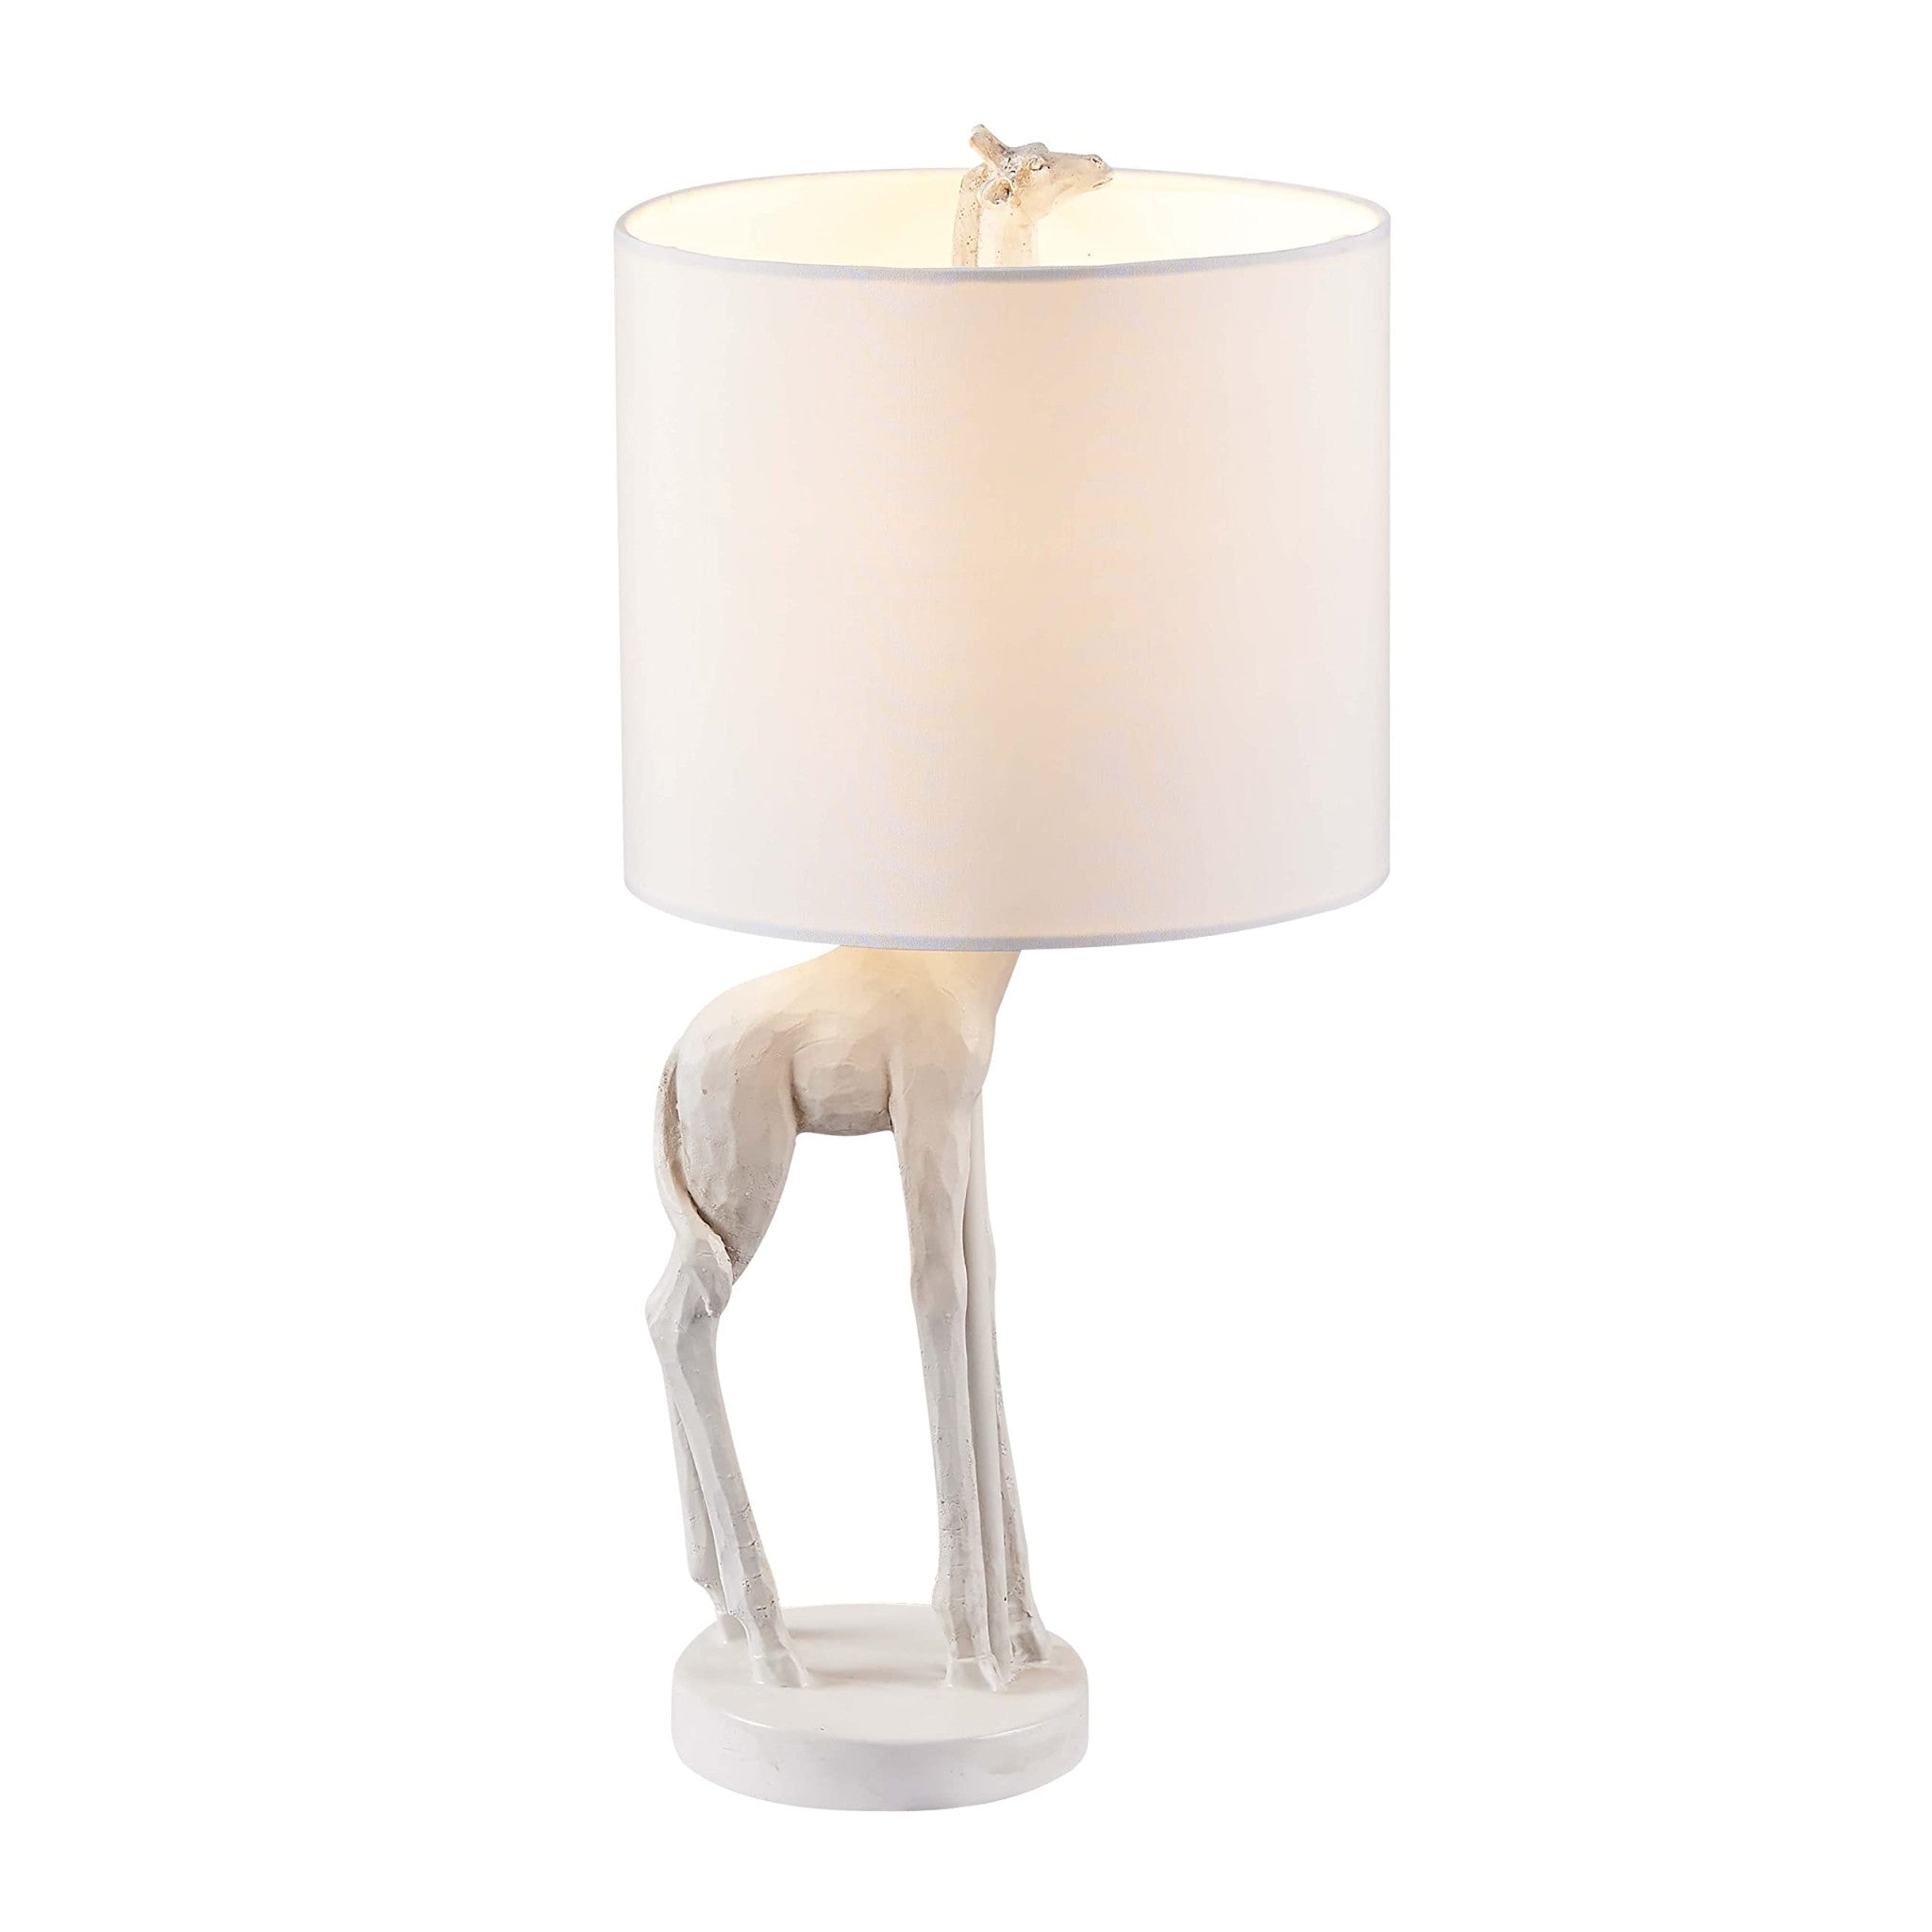 17" Gold Textured Giraffe Table Lamp With White Drum Shade - Tuesday Morning-Table Lamps